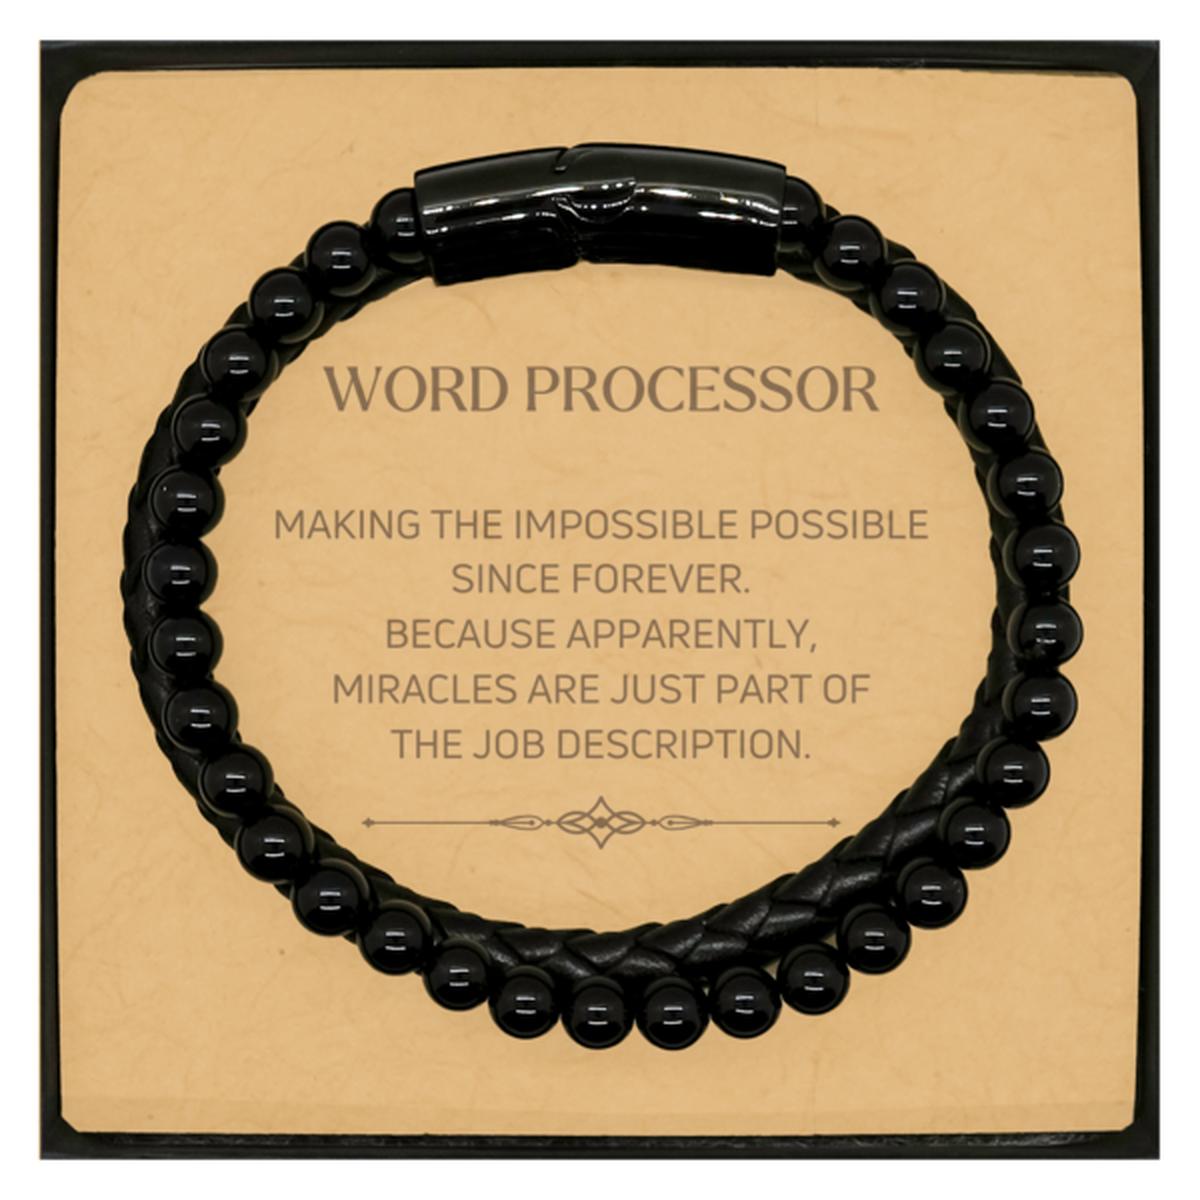 Funny Word Processor Gifts, Miracles are just part of the job description, Inspirational Birthday Christmas Stone Leather Bracelets For Word Processor, Men, Women, Coworkers, Friends, Boss